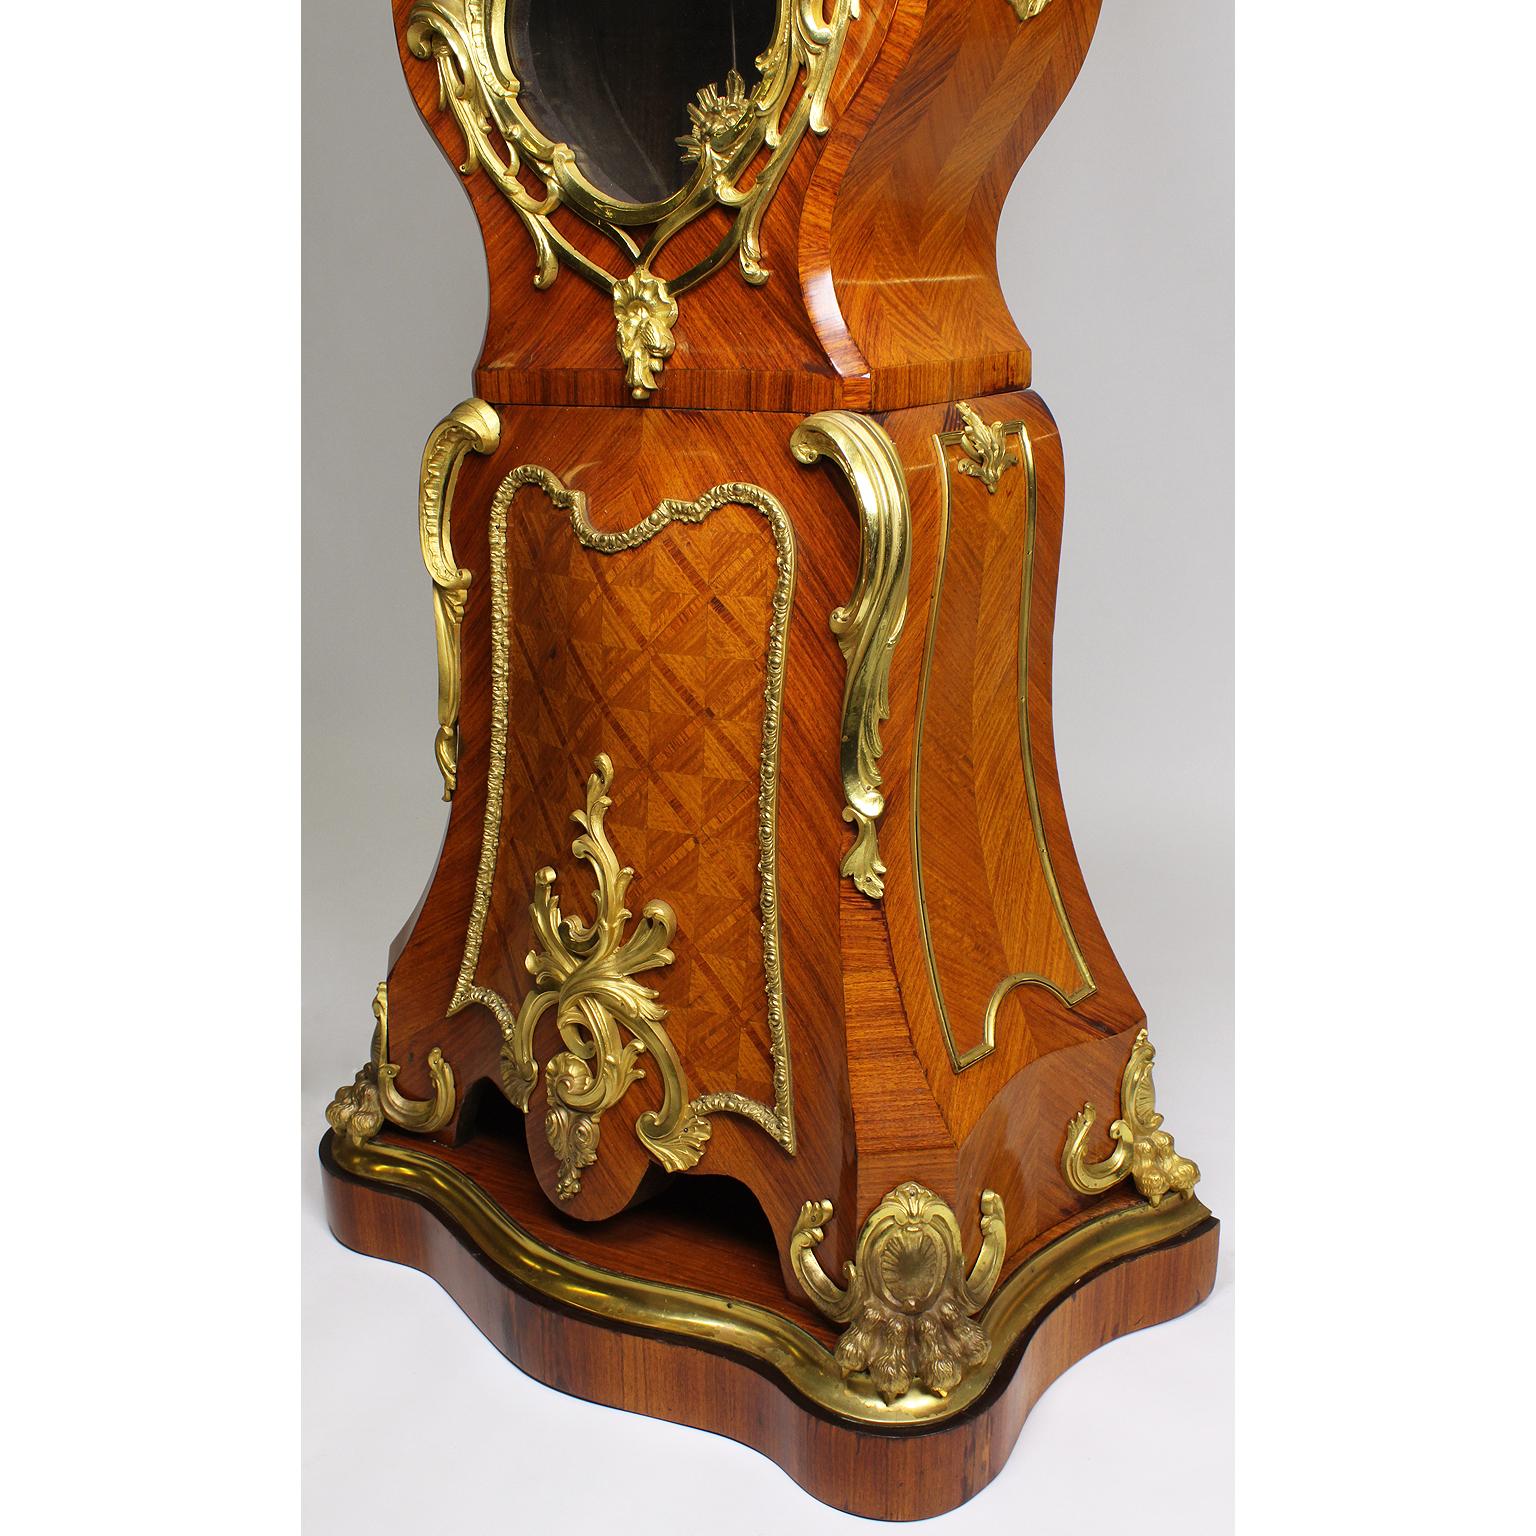 French 19th-20th Century Régence Style Gilt-Bronze Mounted Longcase Clock For Sale 7